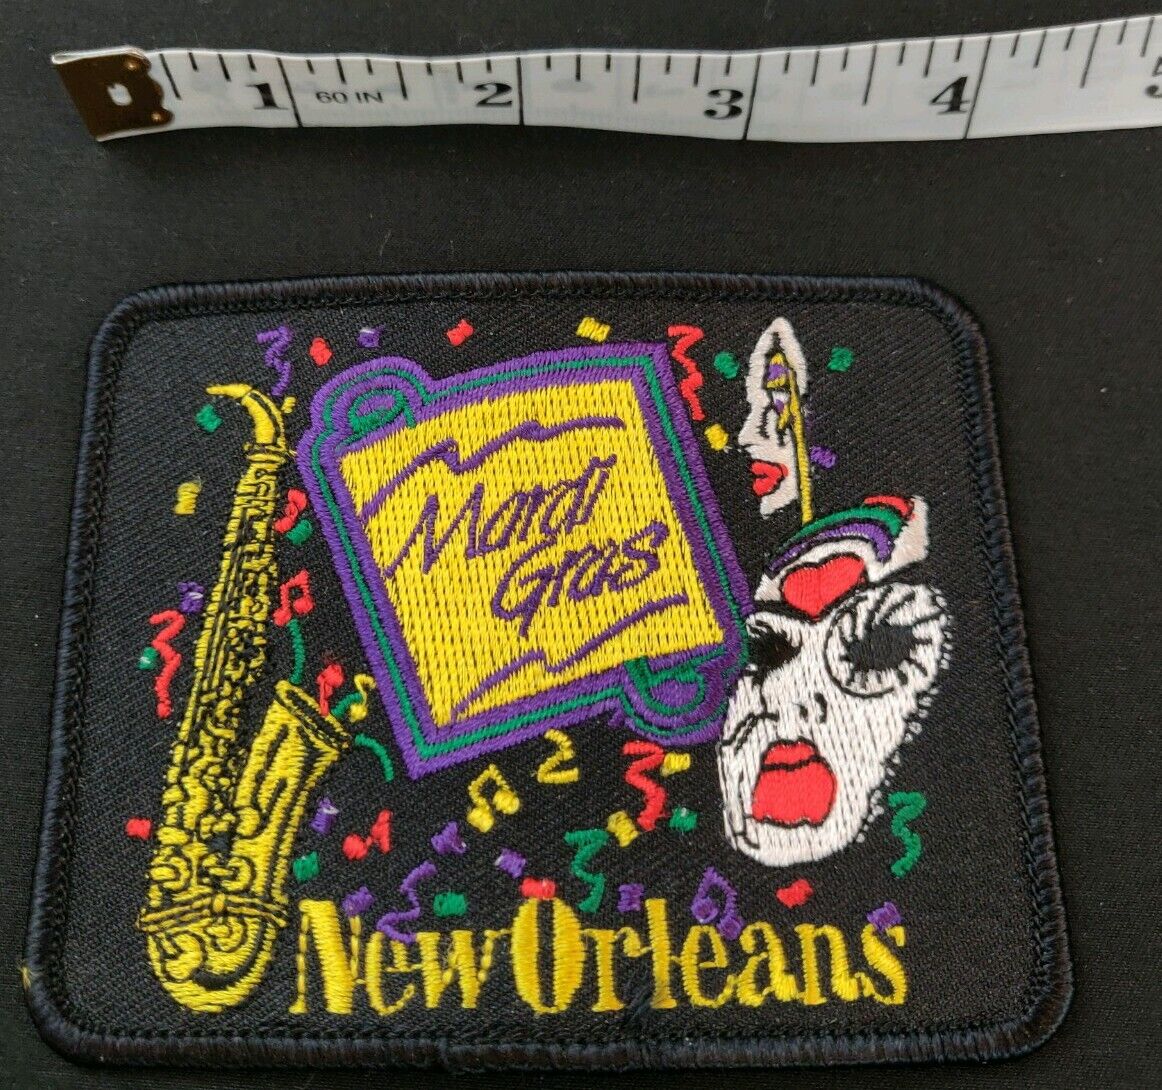 Vintage Mardi Gras New Orleans Louisiana Sew On Embroidered Patch LA